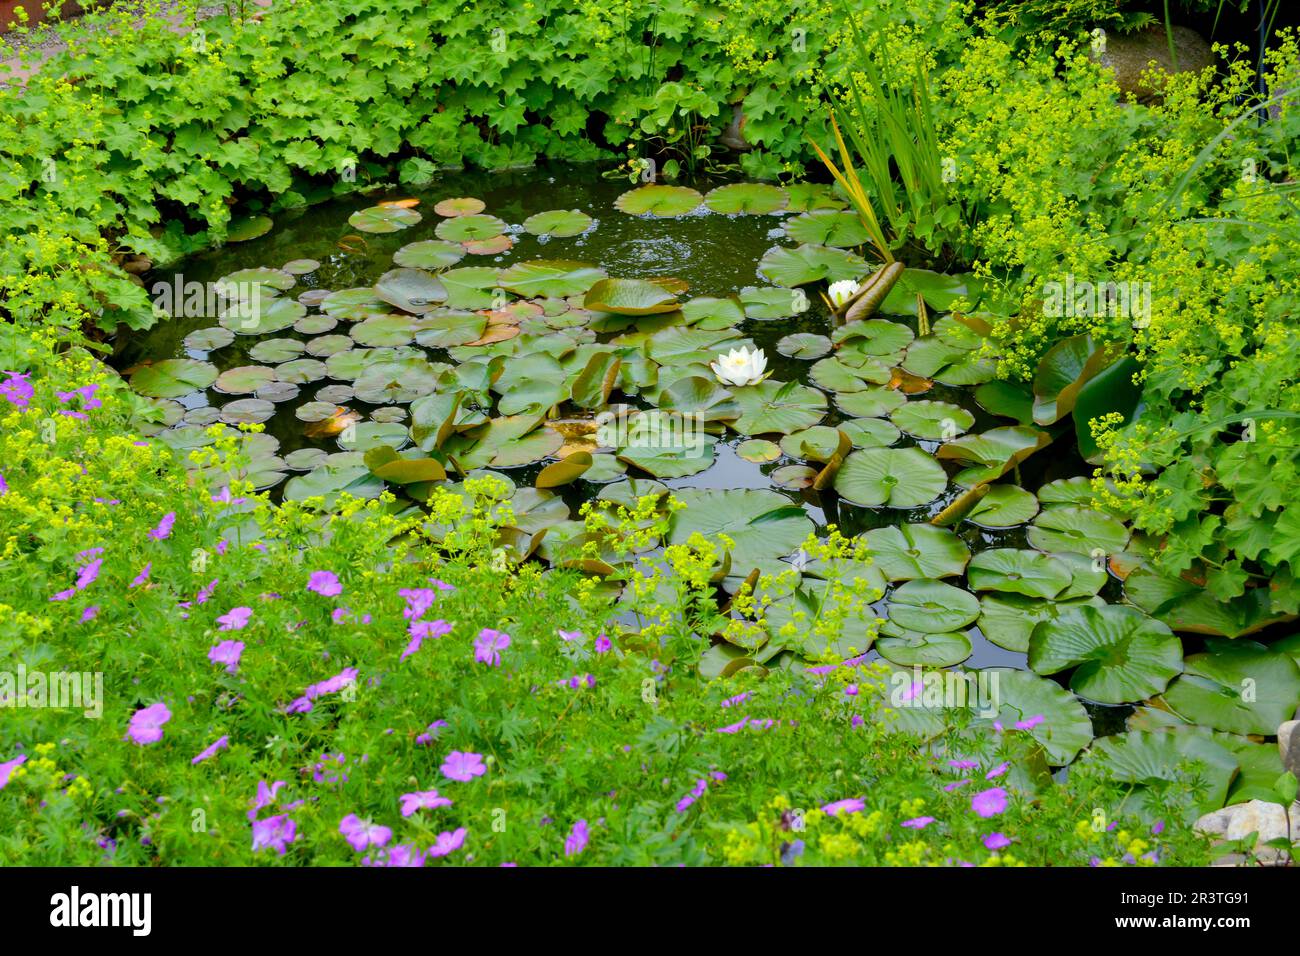 Garden pond, water lily pond in summer, lady's slipper and cranesbill at the pond Stock Photo